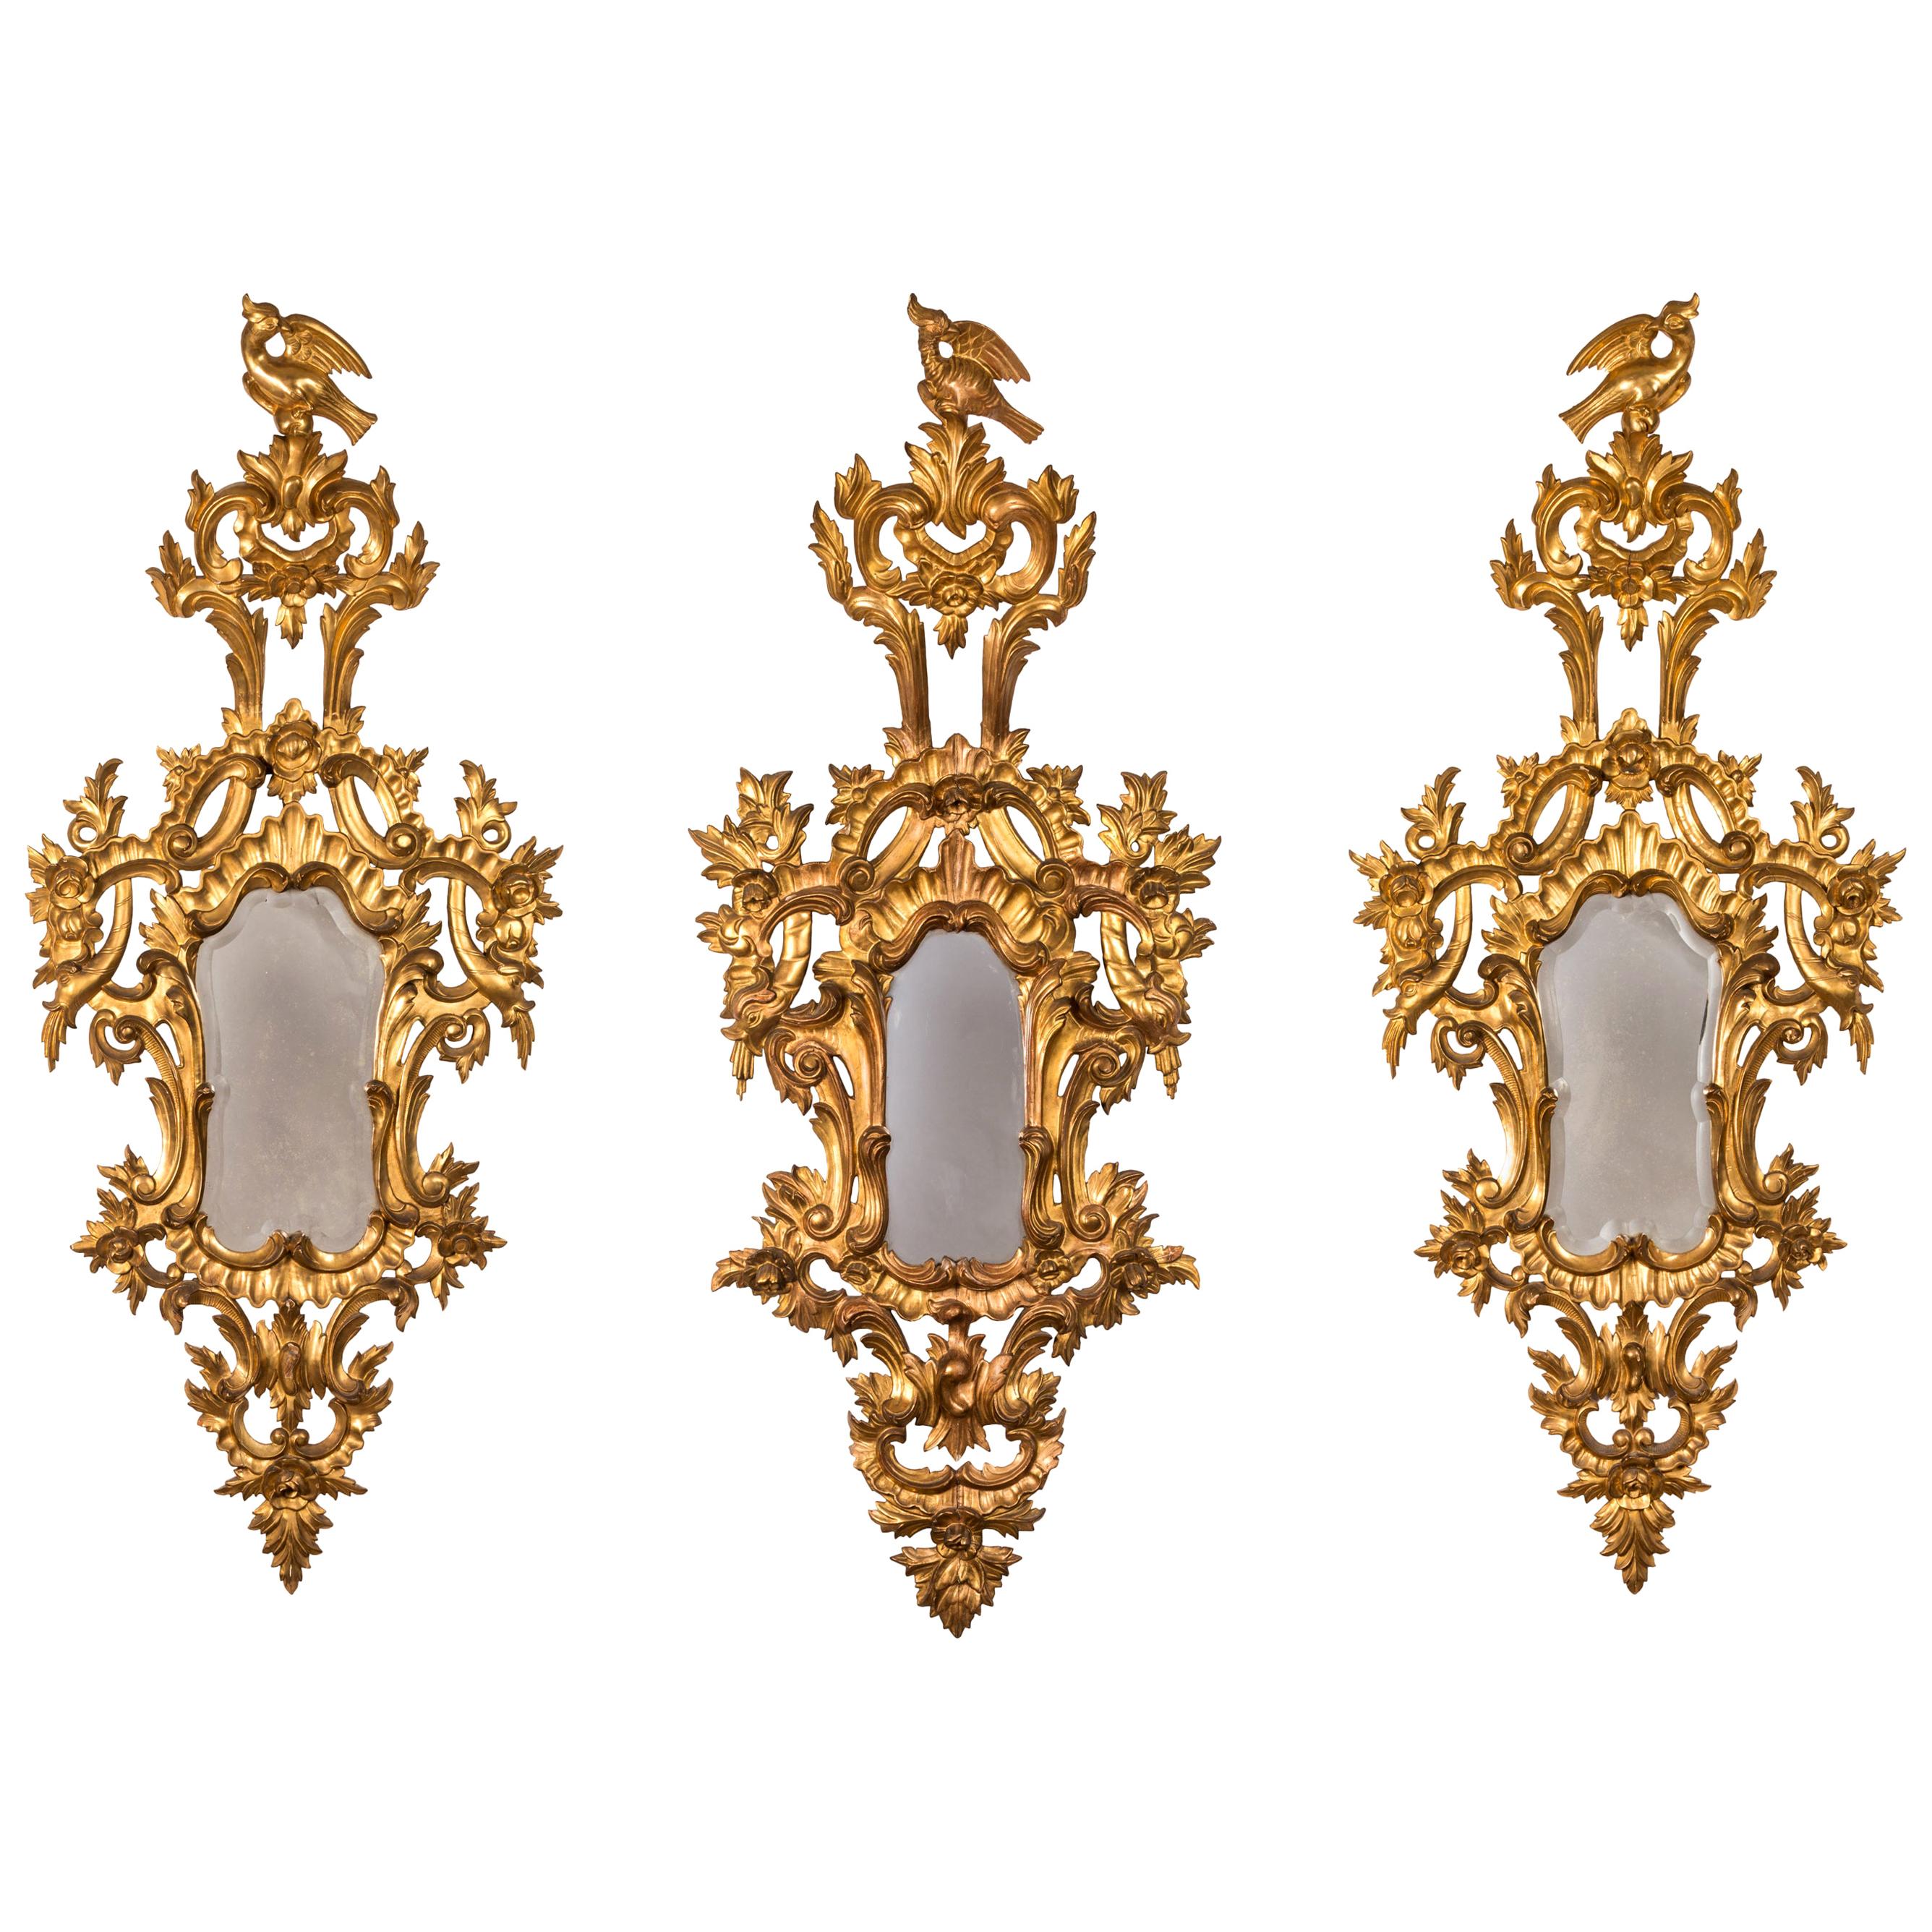 Matching Set of Three 18th Century French Rococo Carved Giltwood Mirrors For Sale